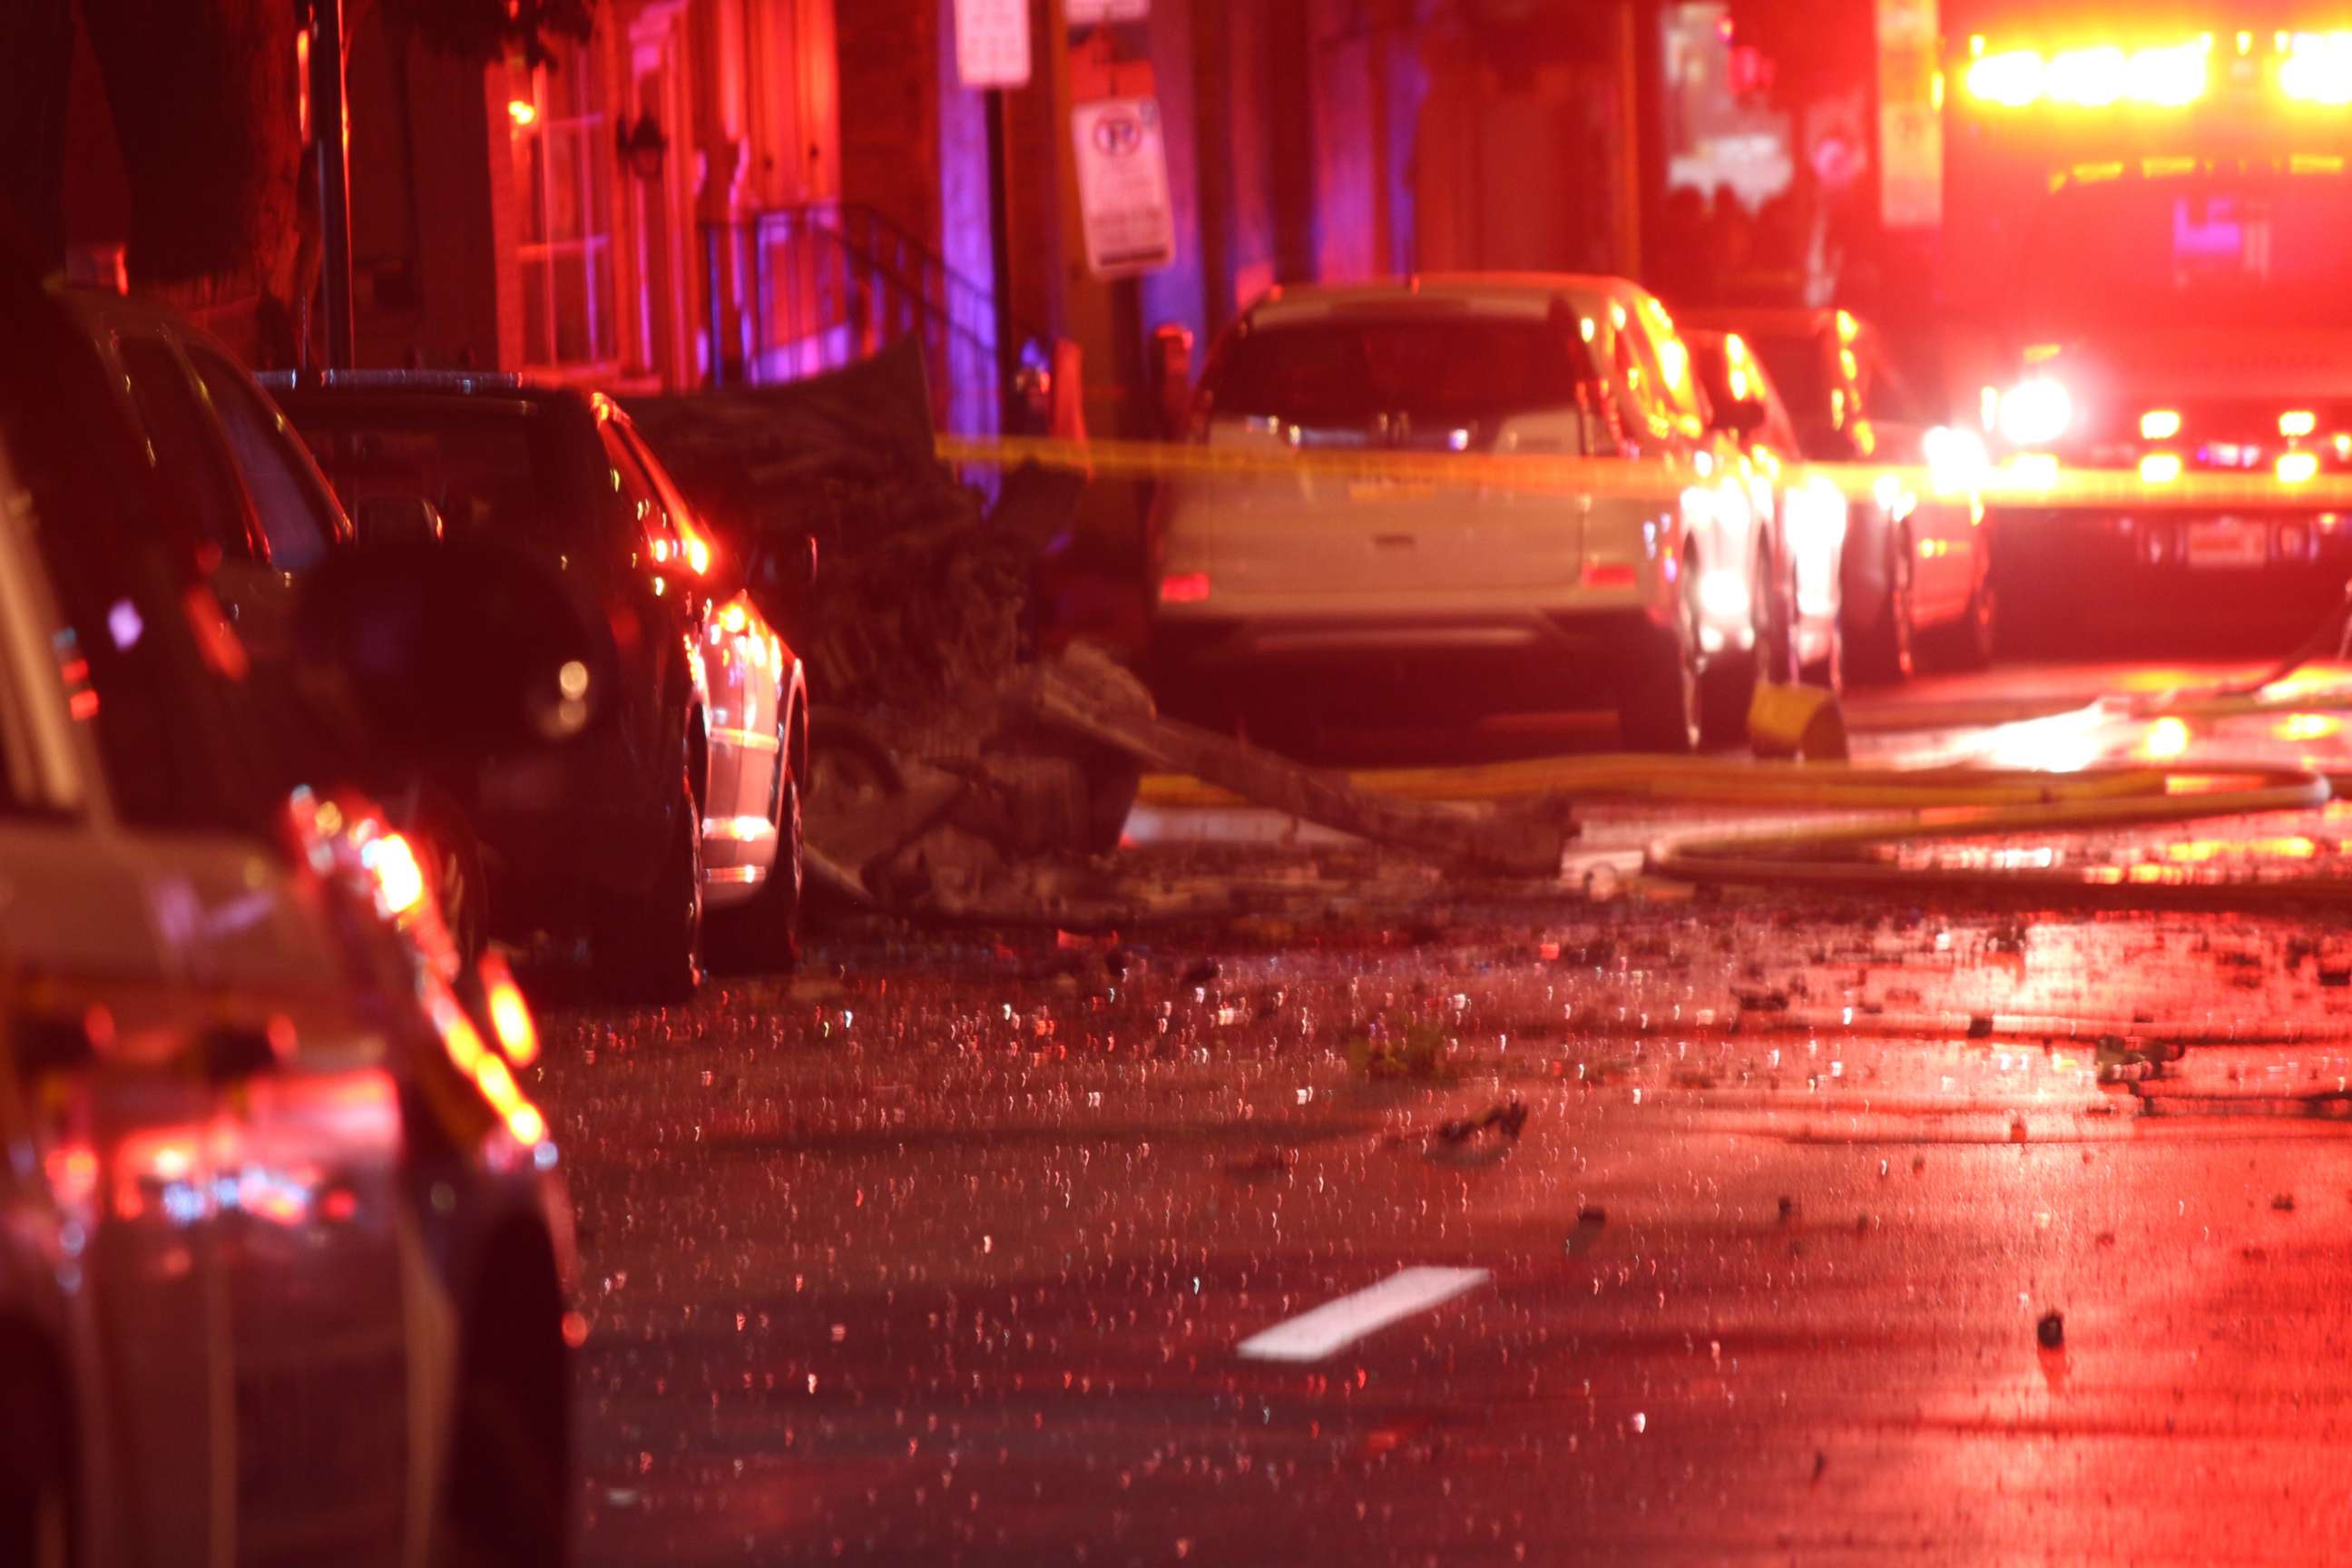 PHOTO: A deadly car explosion rattled a neighborhood in Allentown, Pa., Sept. 29, 2018.